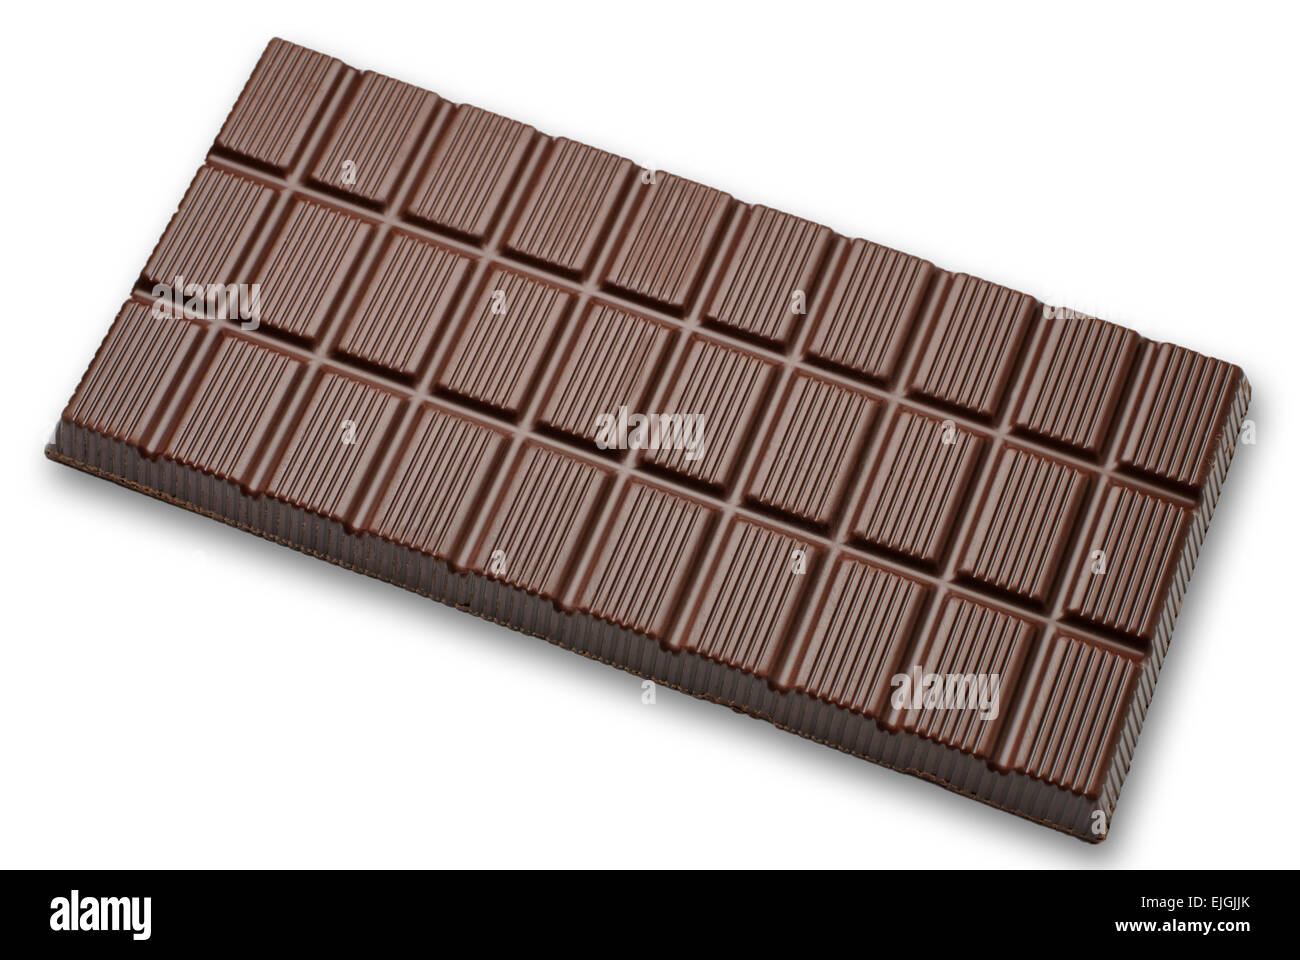 Grooved chocolate bar close-up Stock Photo